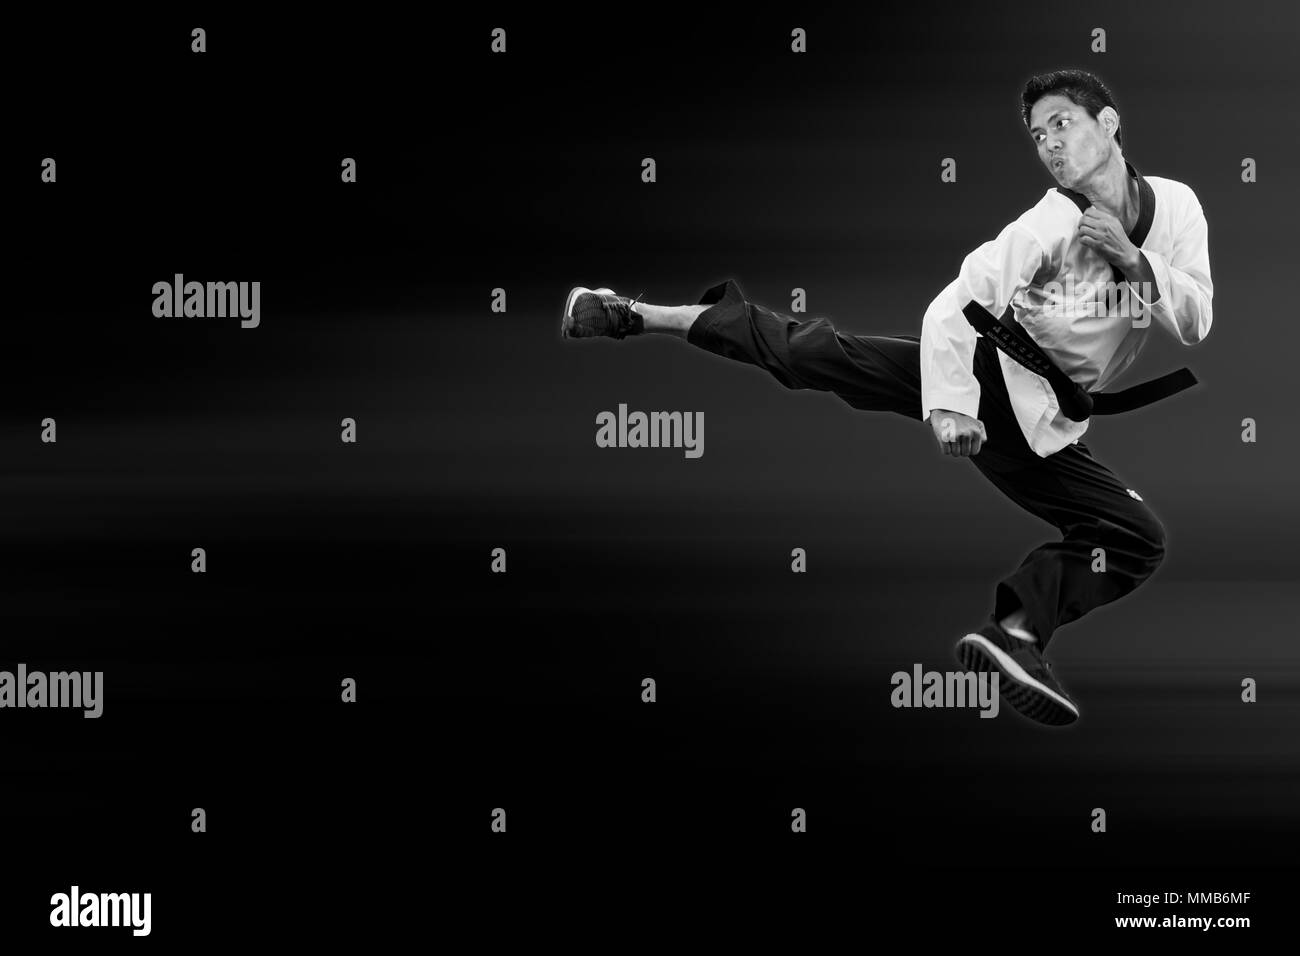 Homme Taekwondo jump flying high kick sur fond noir pour poster with clipping path Banque D'Images